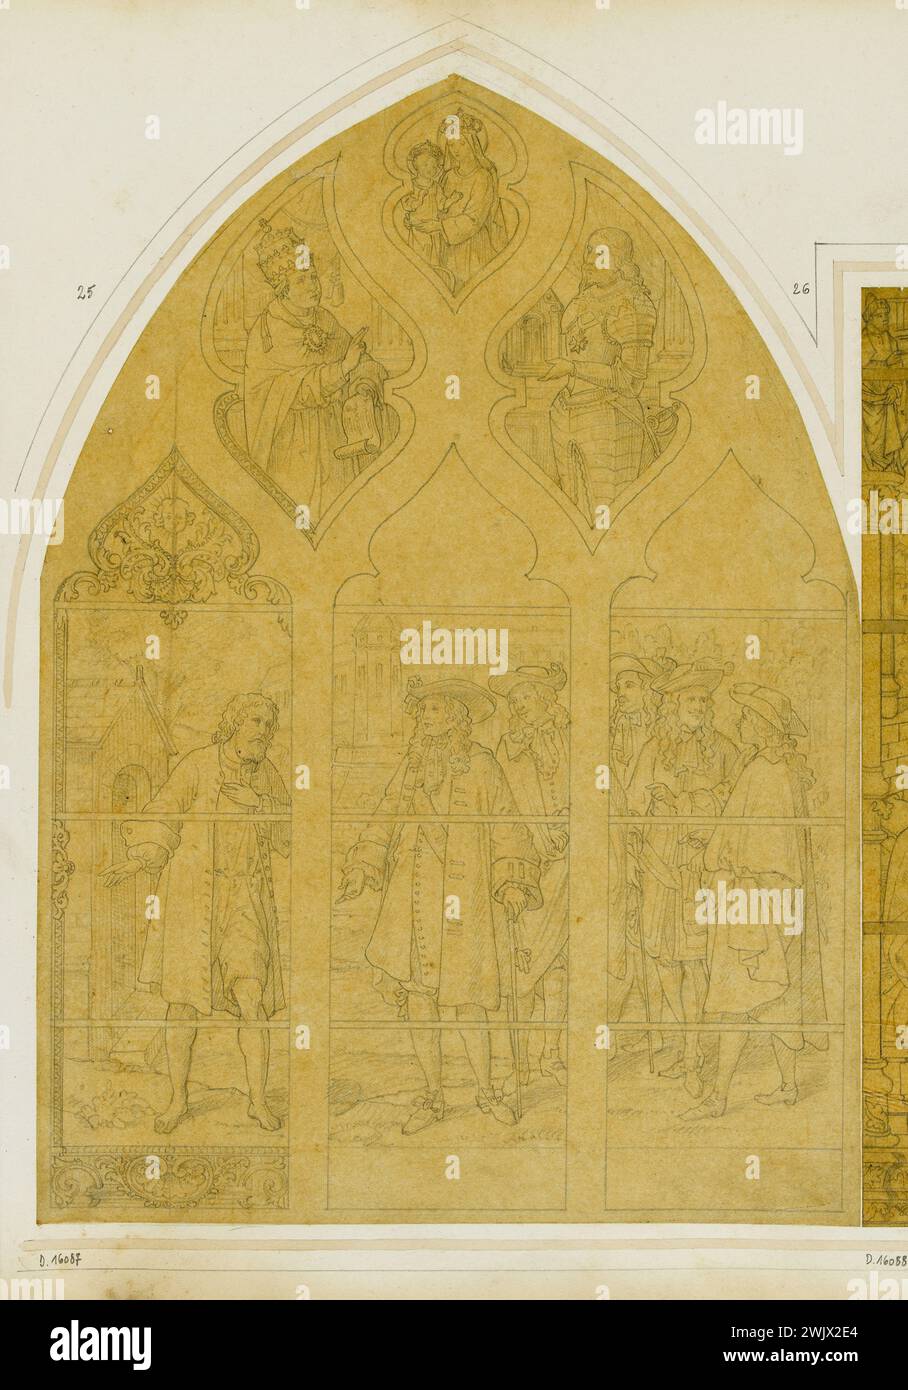 GSELL-Laurent workshop. Album n ° 3; stained glass project; 3 spans window. A pope and Louis XIII adoring the Virgin and the Child, Louis XIV (?) And a hermit (?). Pencil on layer. Paris, Carnavalet museum. Adoir, album n ° 3, worship, bourbon, catholic, chretian, pencil on layer, child, hermit, son god, window, pope, project, french king, travee, three, virgin, stained glass Stock Photo